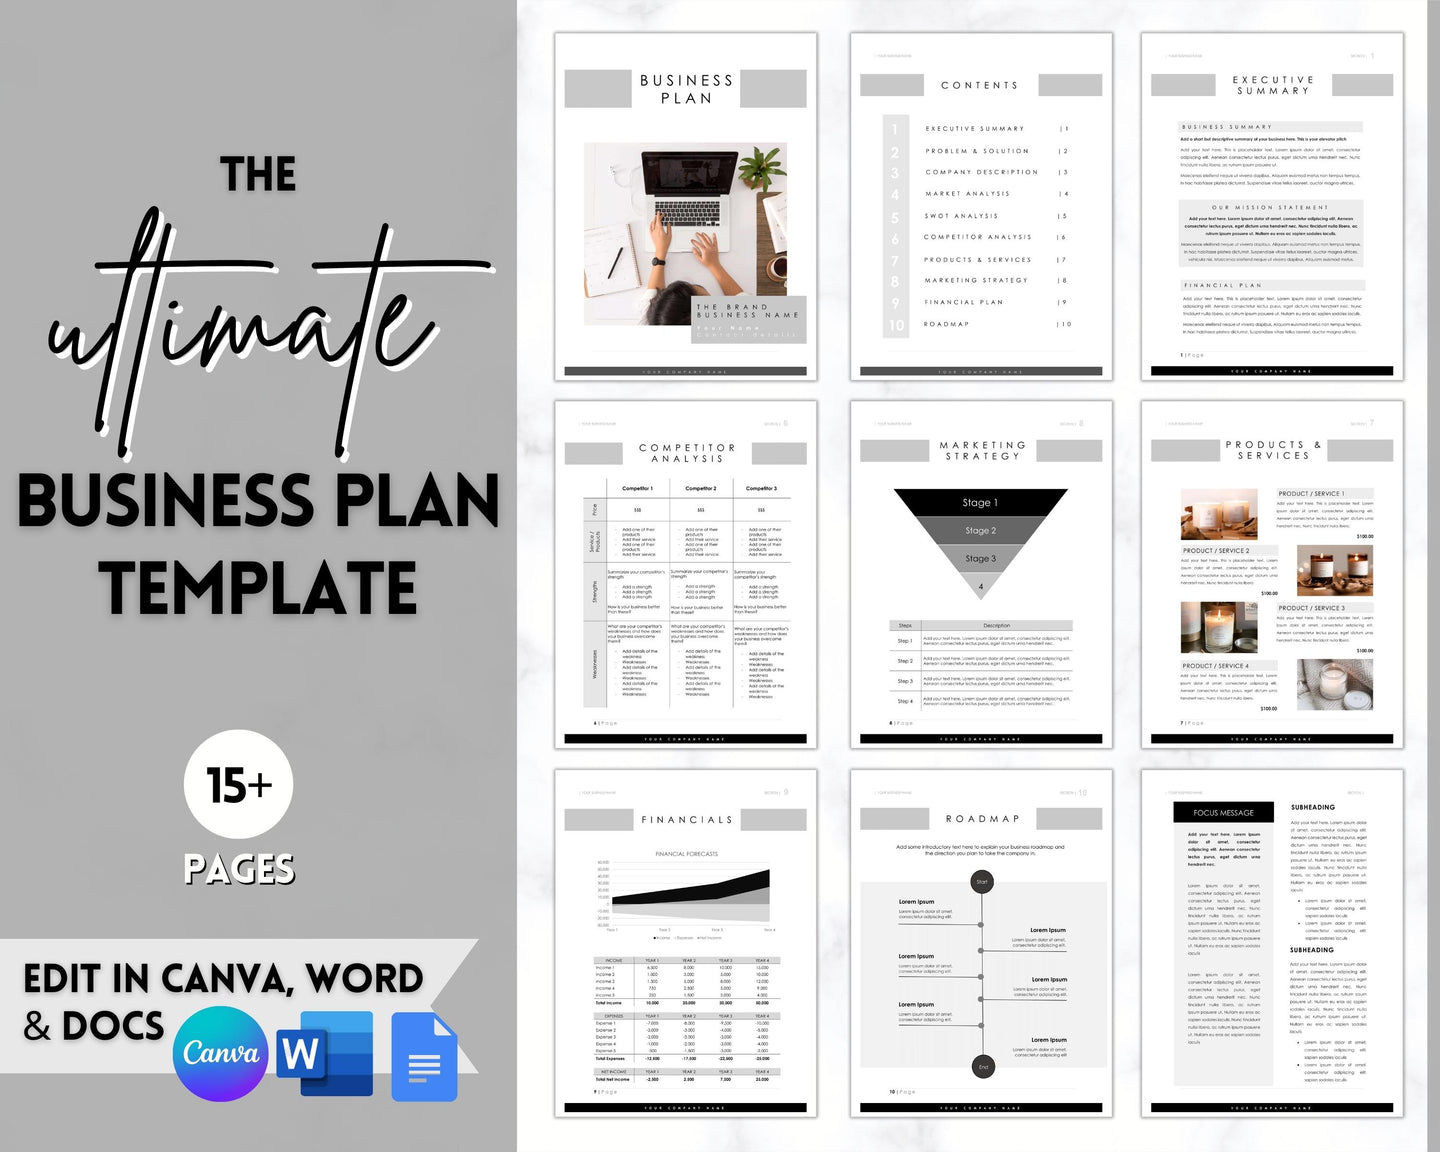 Business Plan Template | Editable Small Business Start Up Workbook in Canva, Word & Google Docs | Mono Strip